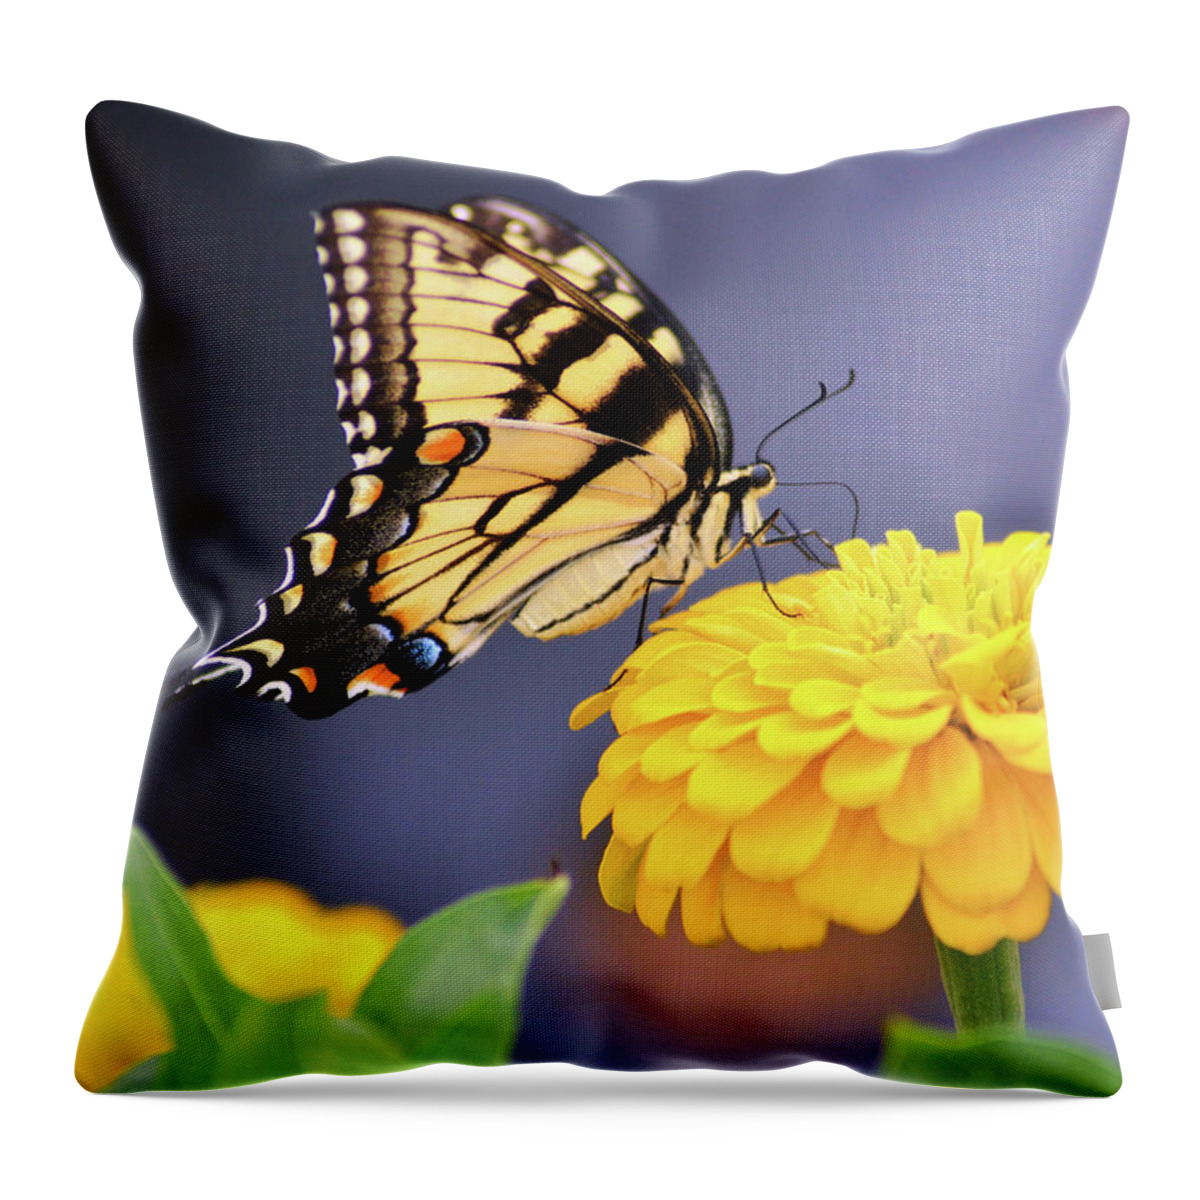 Kathy Kelly Throw Pillow featuring the photograph Mellow Yellow by Kathy Kelly